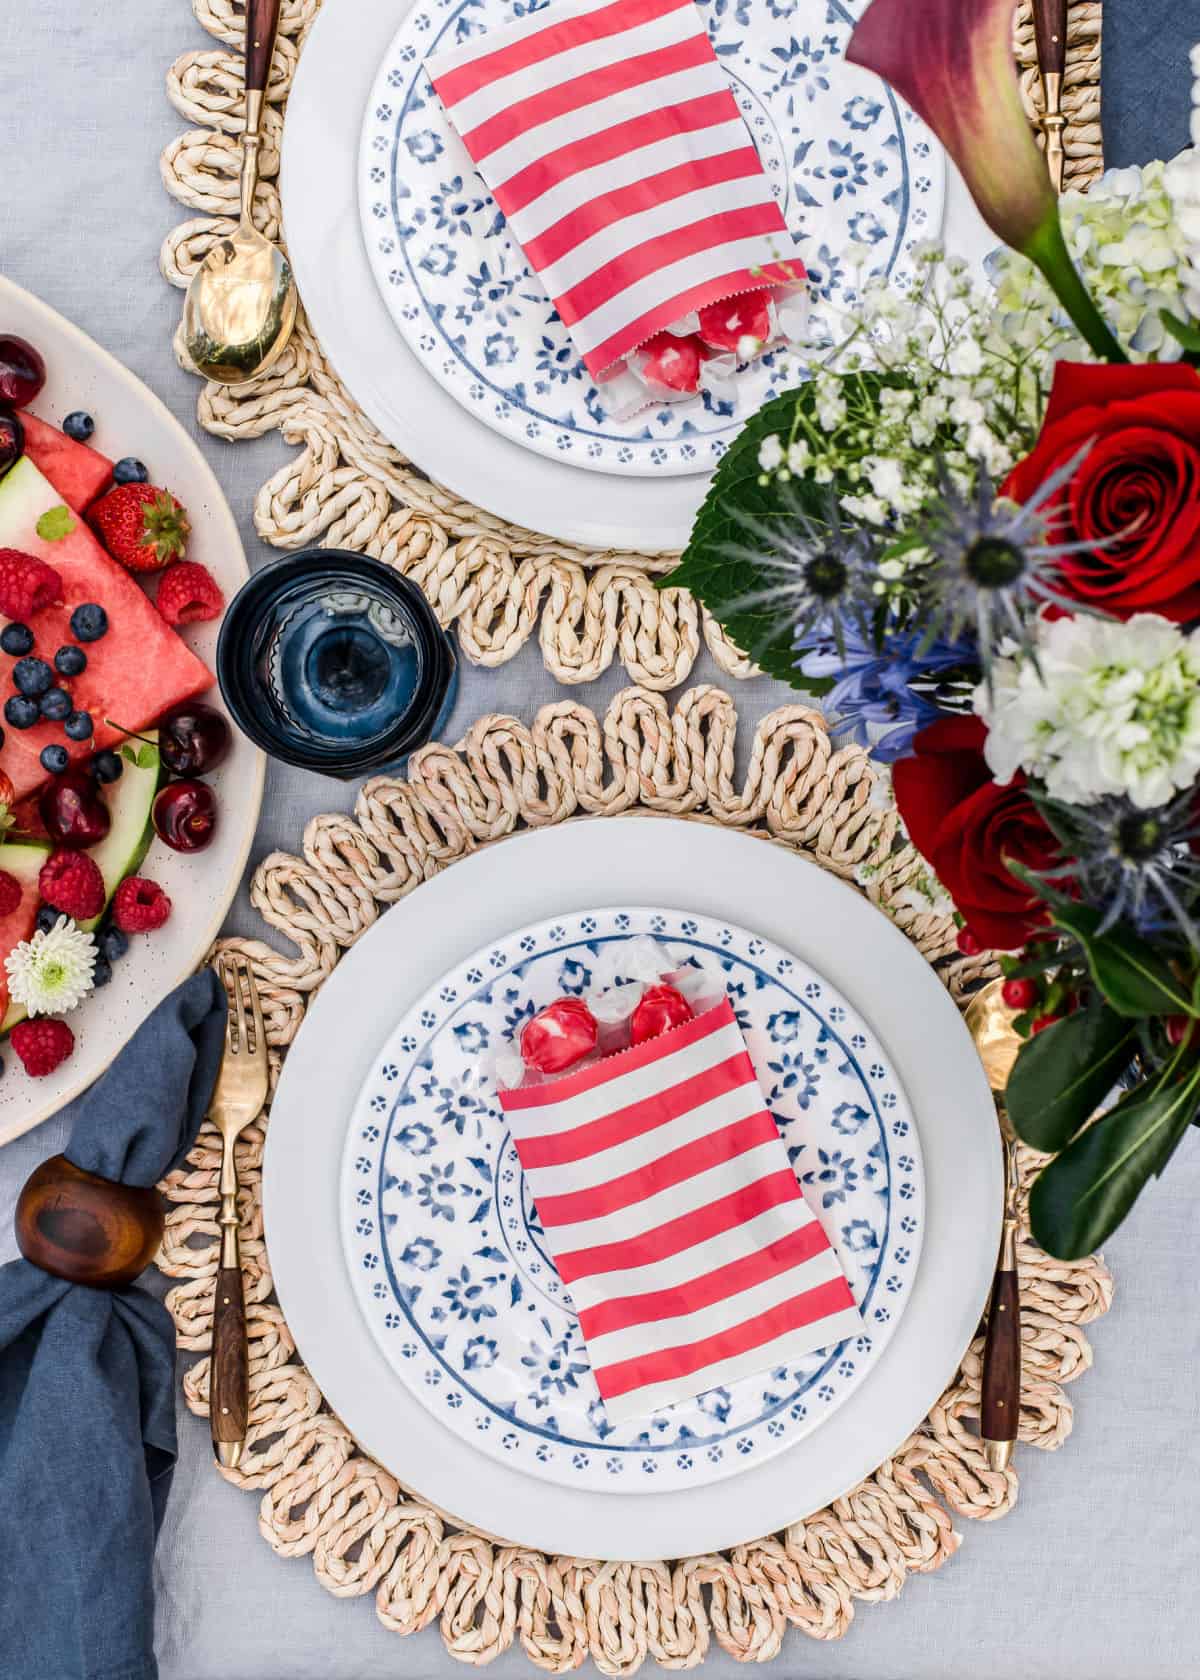 red white and blue place settings for summer party.